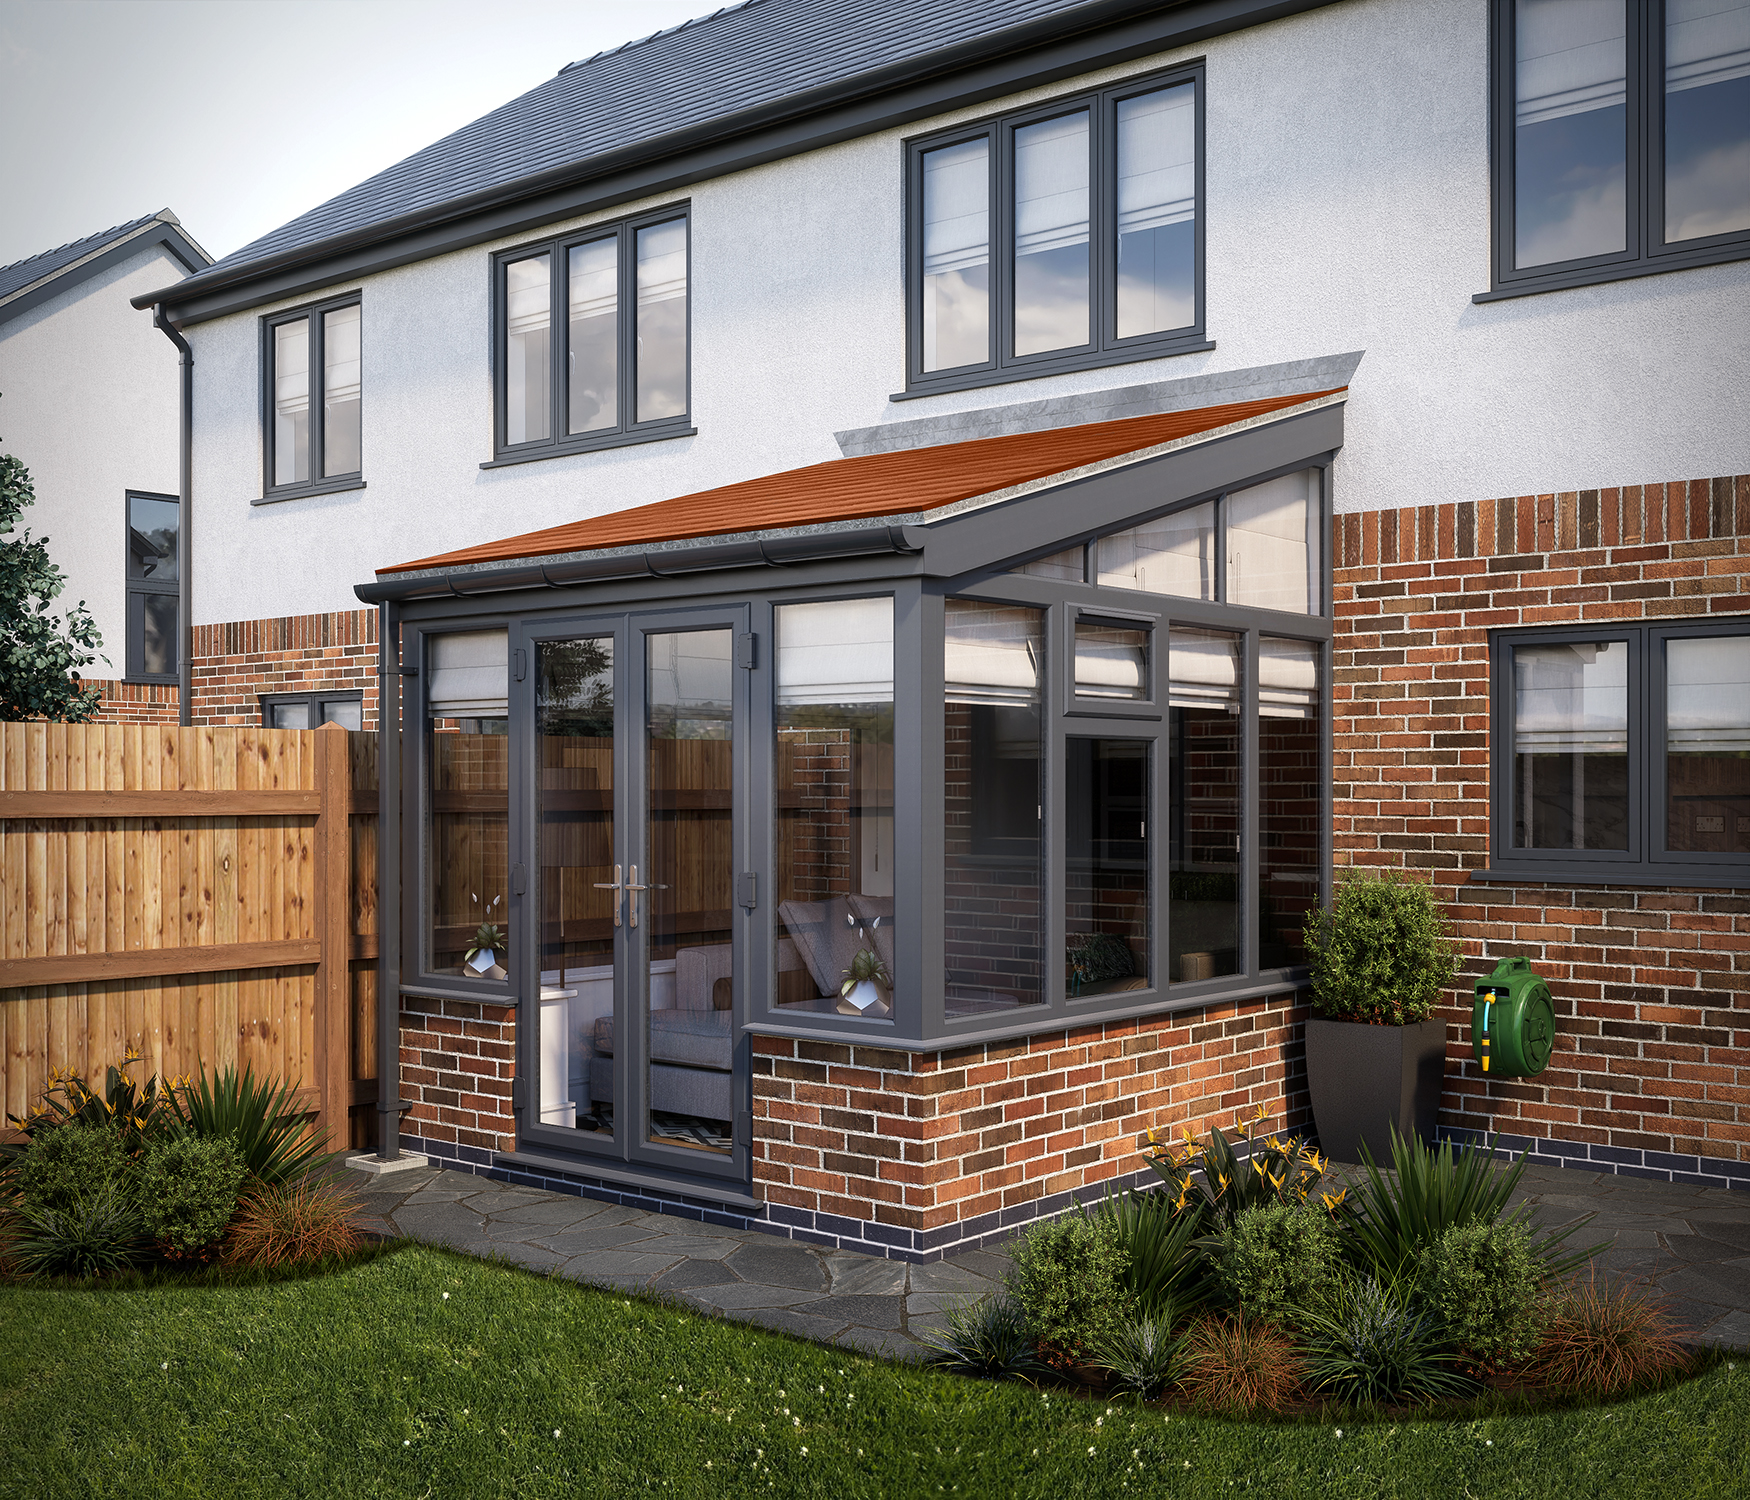 Image of SOLid Roof Lean to Conservatory Grey Frames Dwarf Wall with Rustic Terracotta Tiles - 13 x 10ft